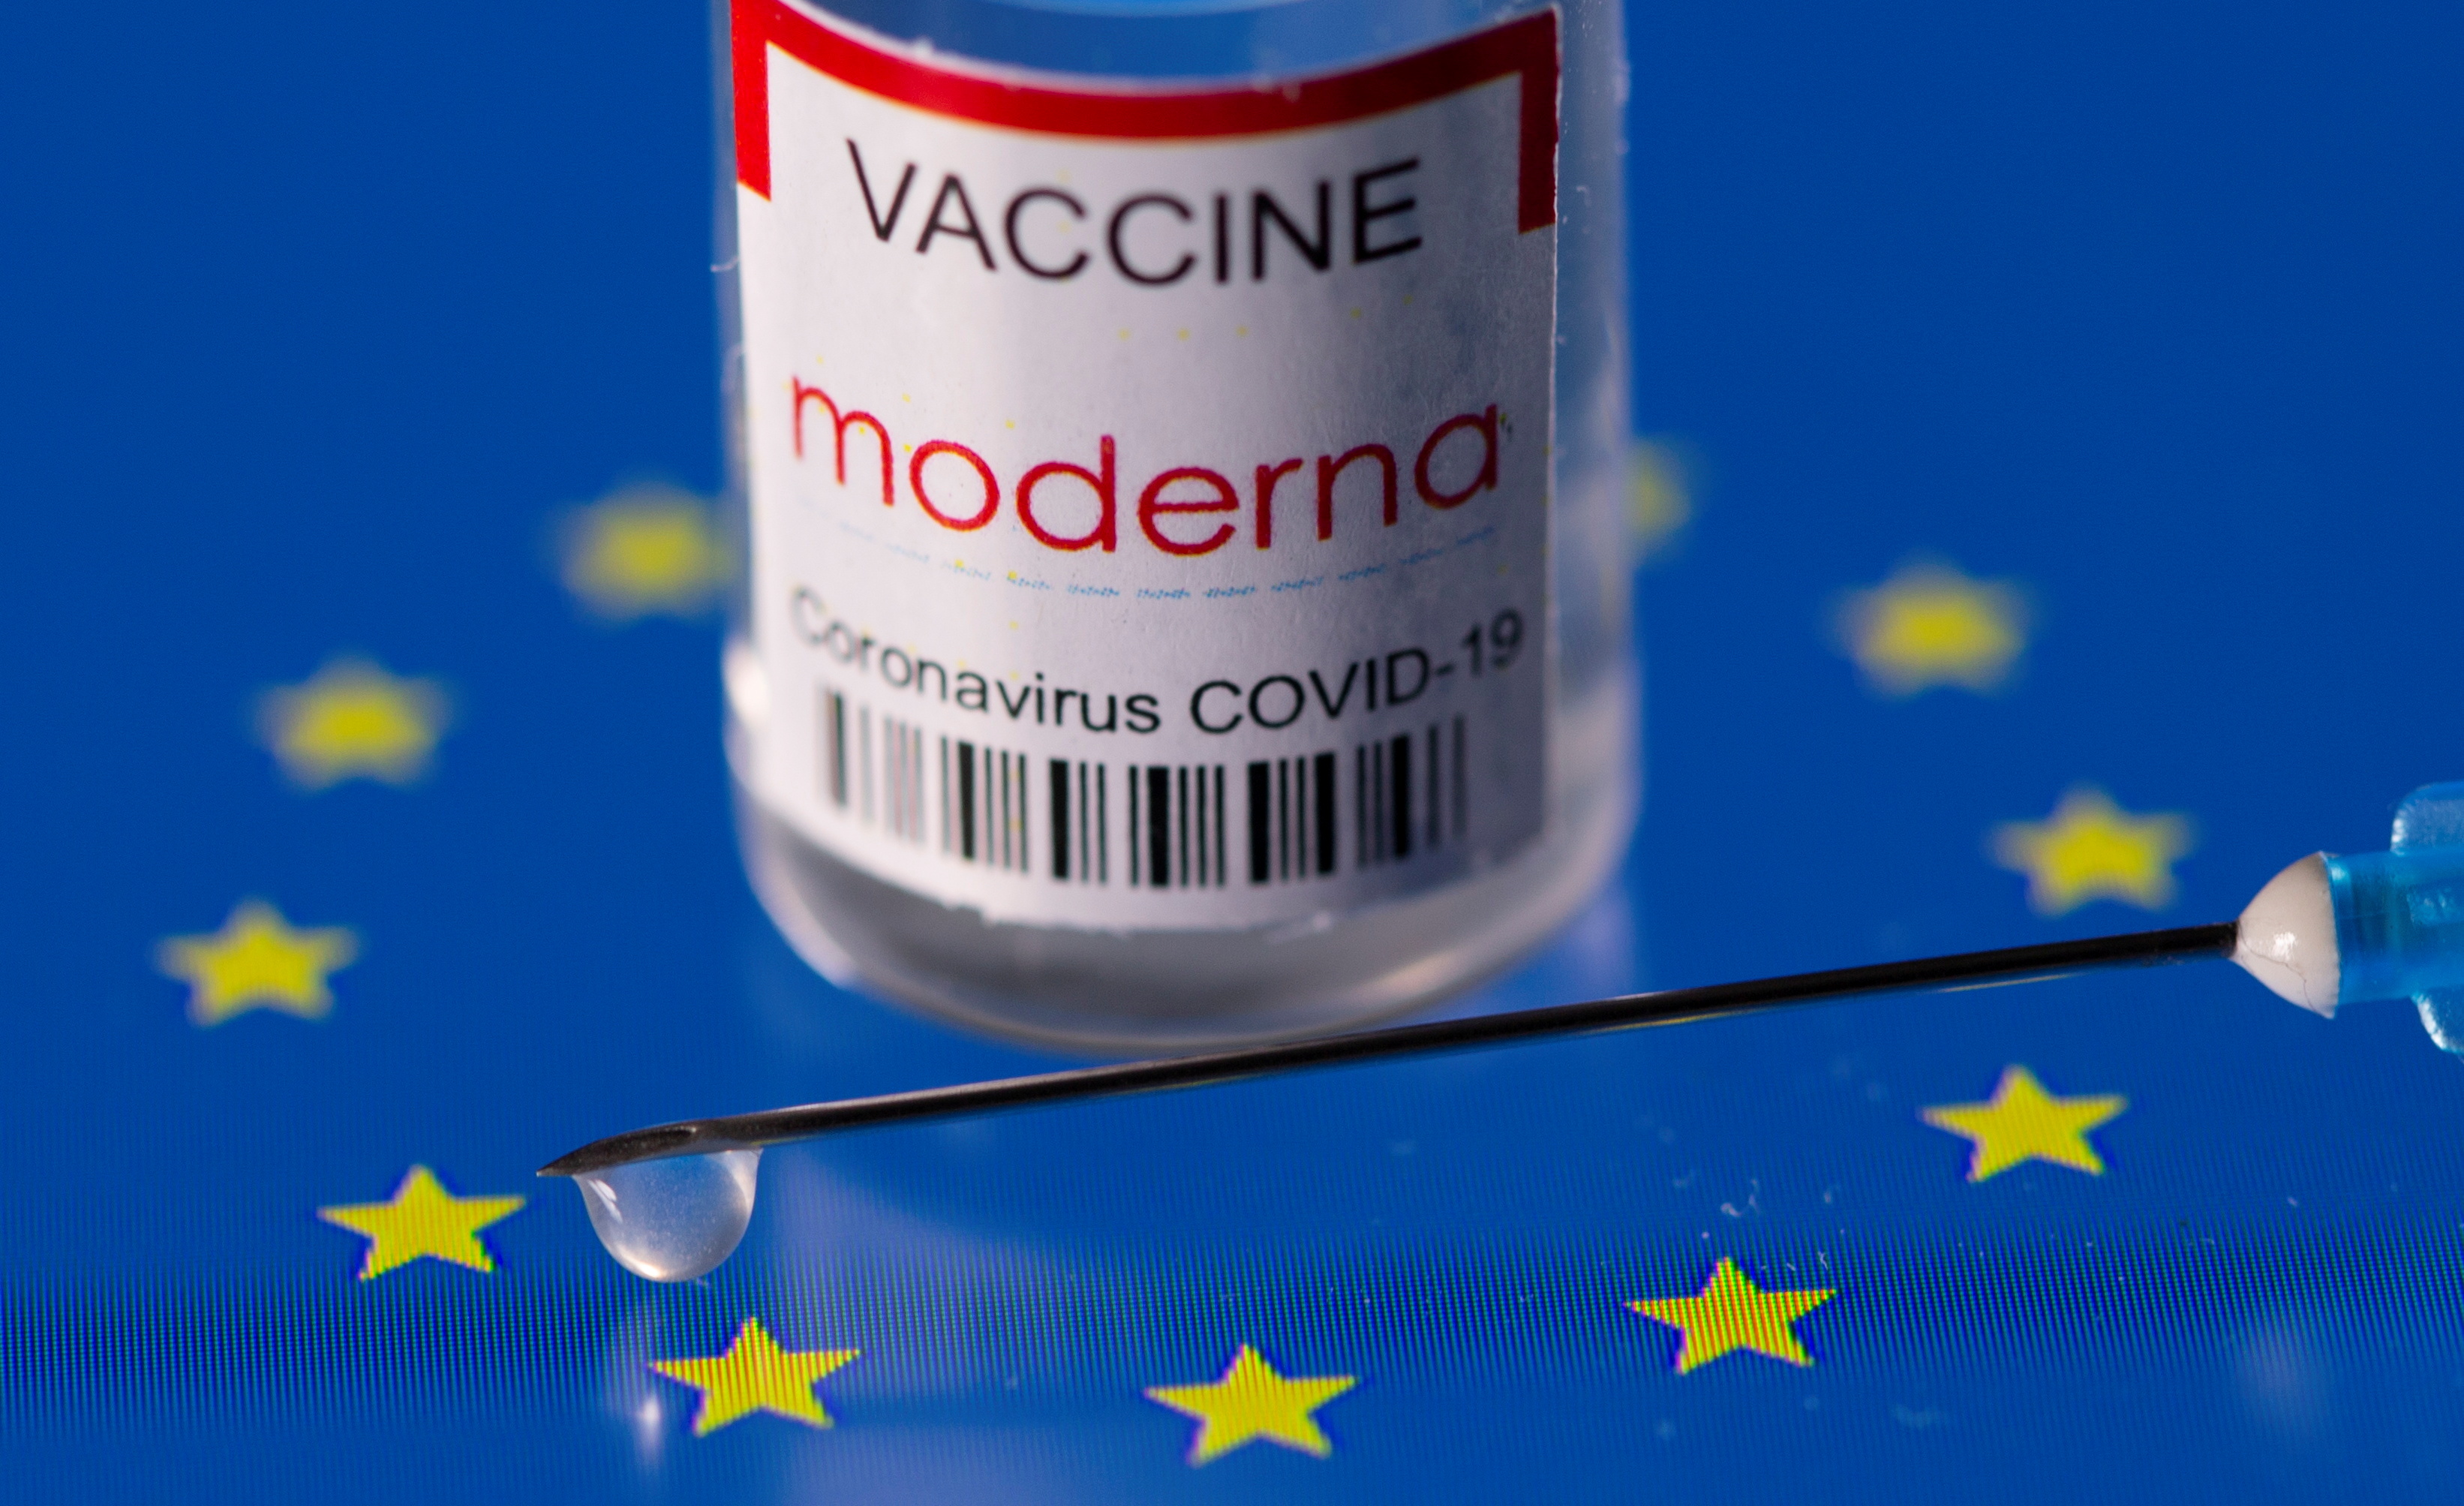 Vial labelled "Moderna coronavirus disease (COVID-19) vaccine" placed on displayed EU flag is seen in this illustration picture taken March 24, 2021. REUTERS/Dado Ruvic/Illustration